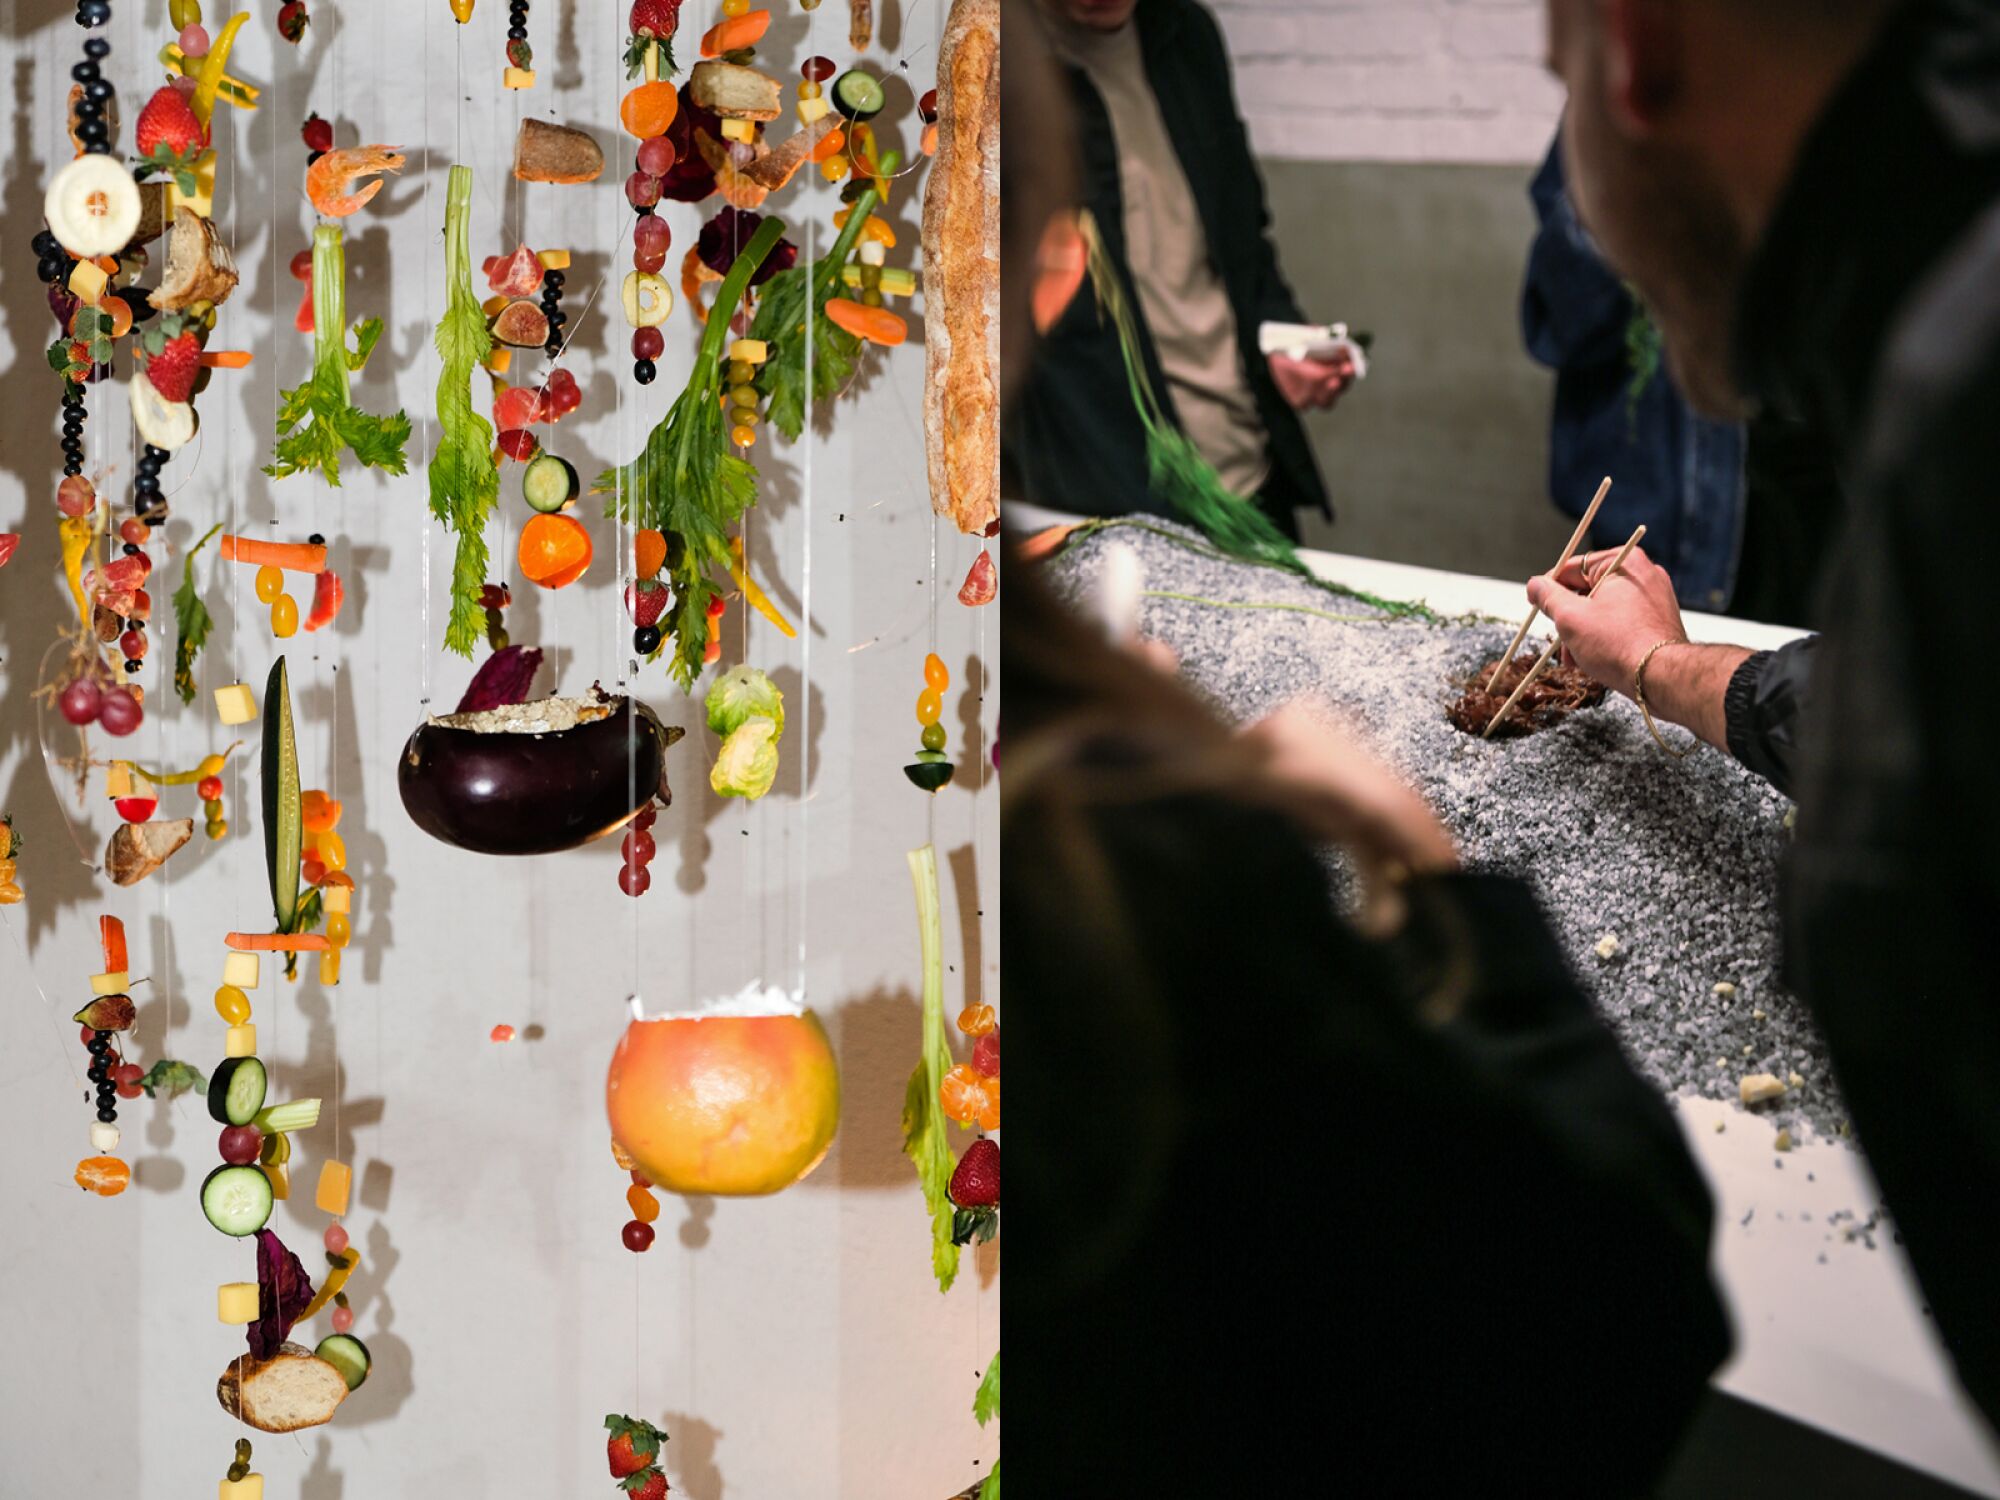 Side-by-side images of a hanging food installation and a person reaching chopsticks into a volcano-like display